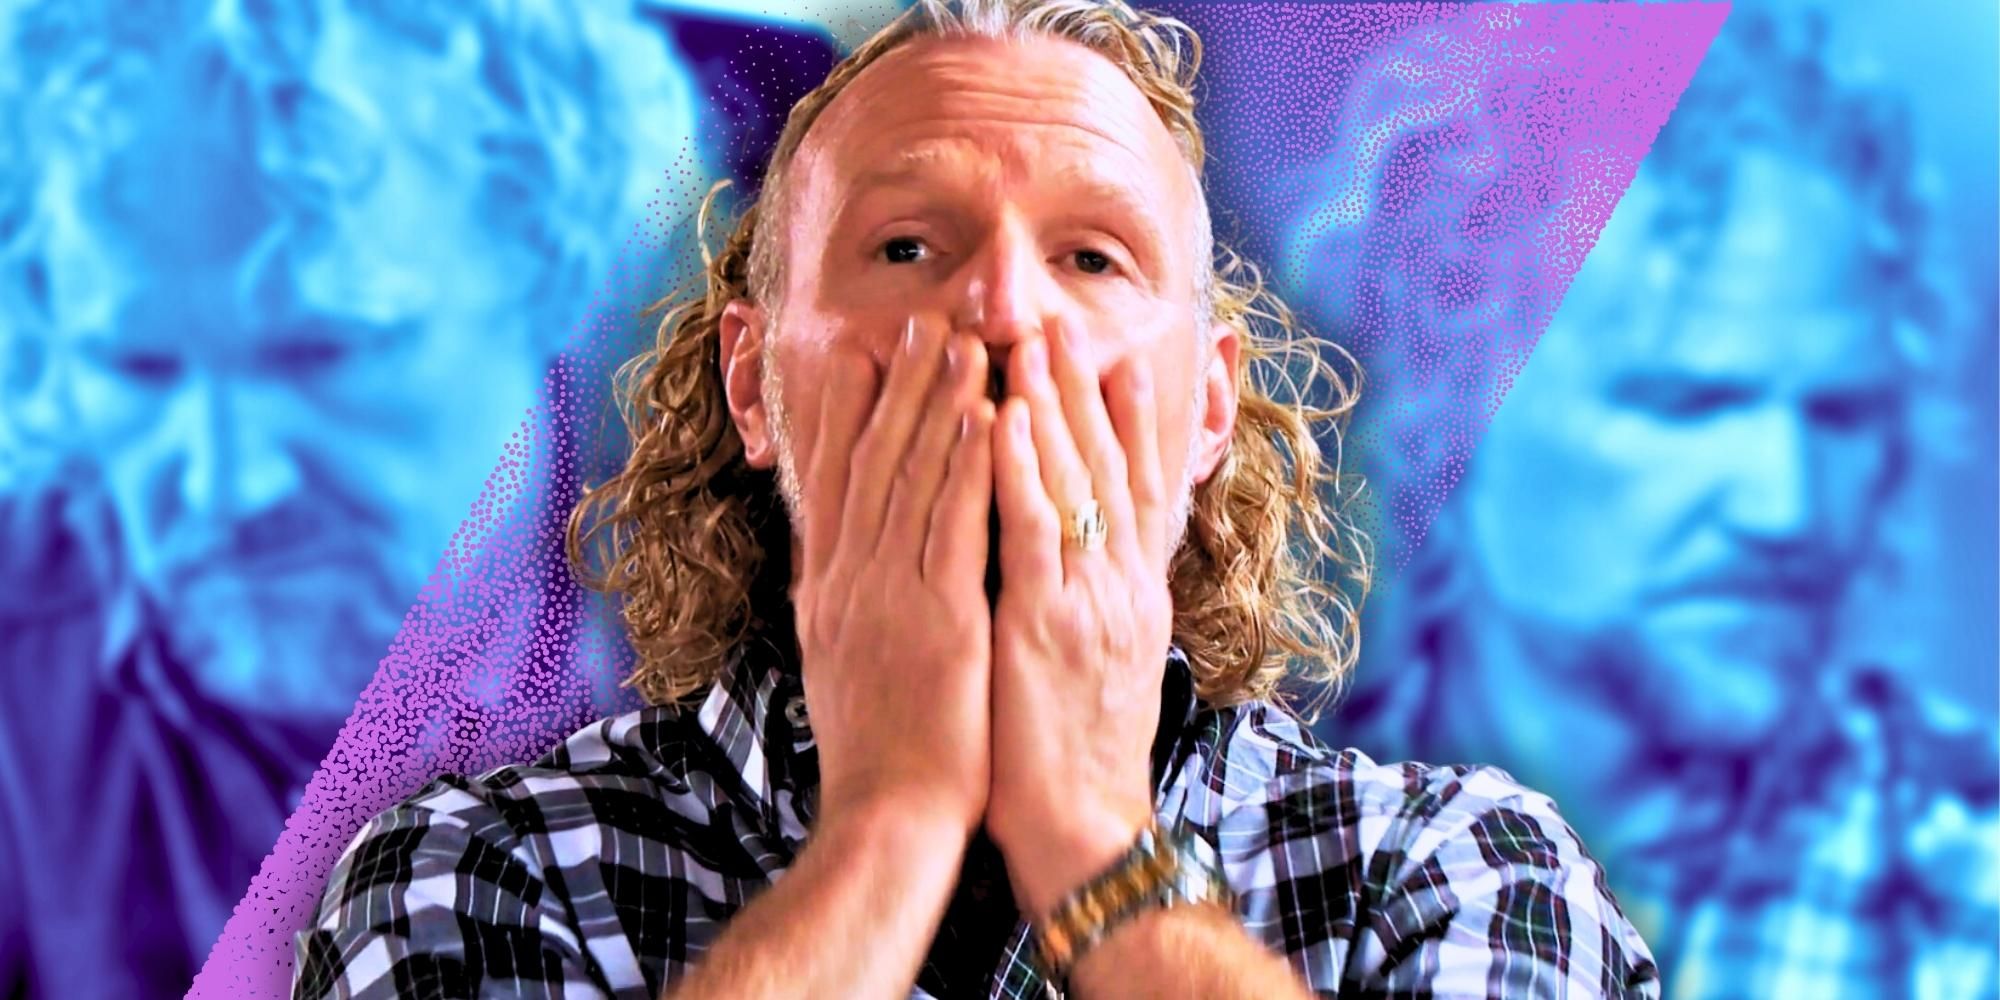 Sister Wives star Kody Brown with his hands on his face, looking exasperated